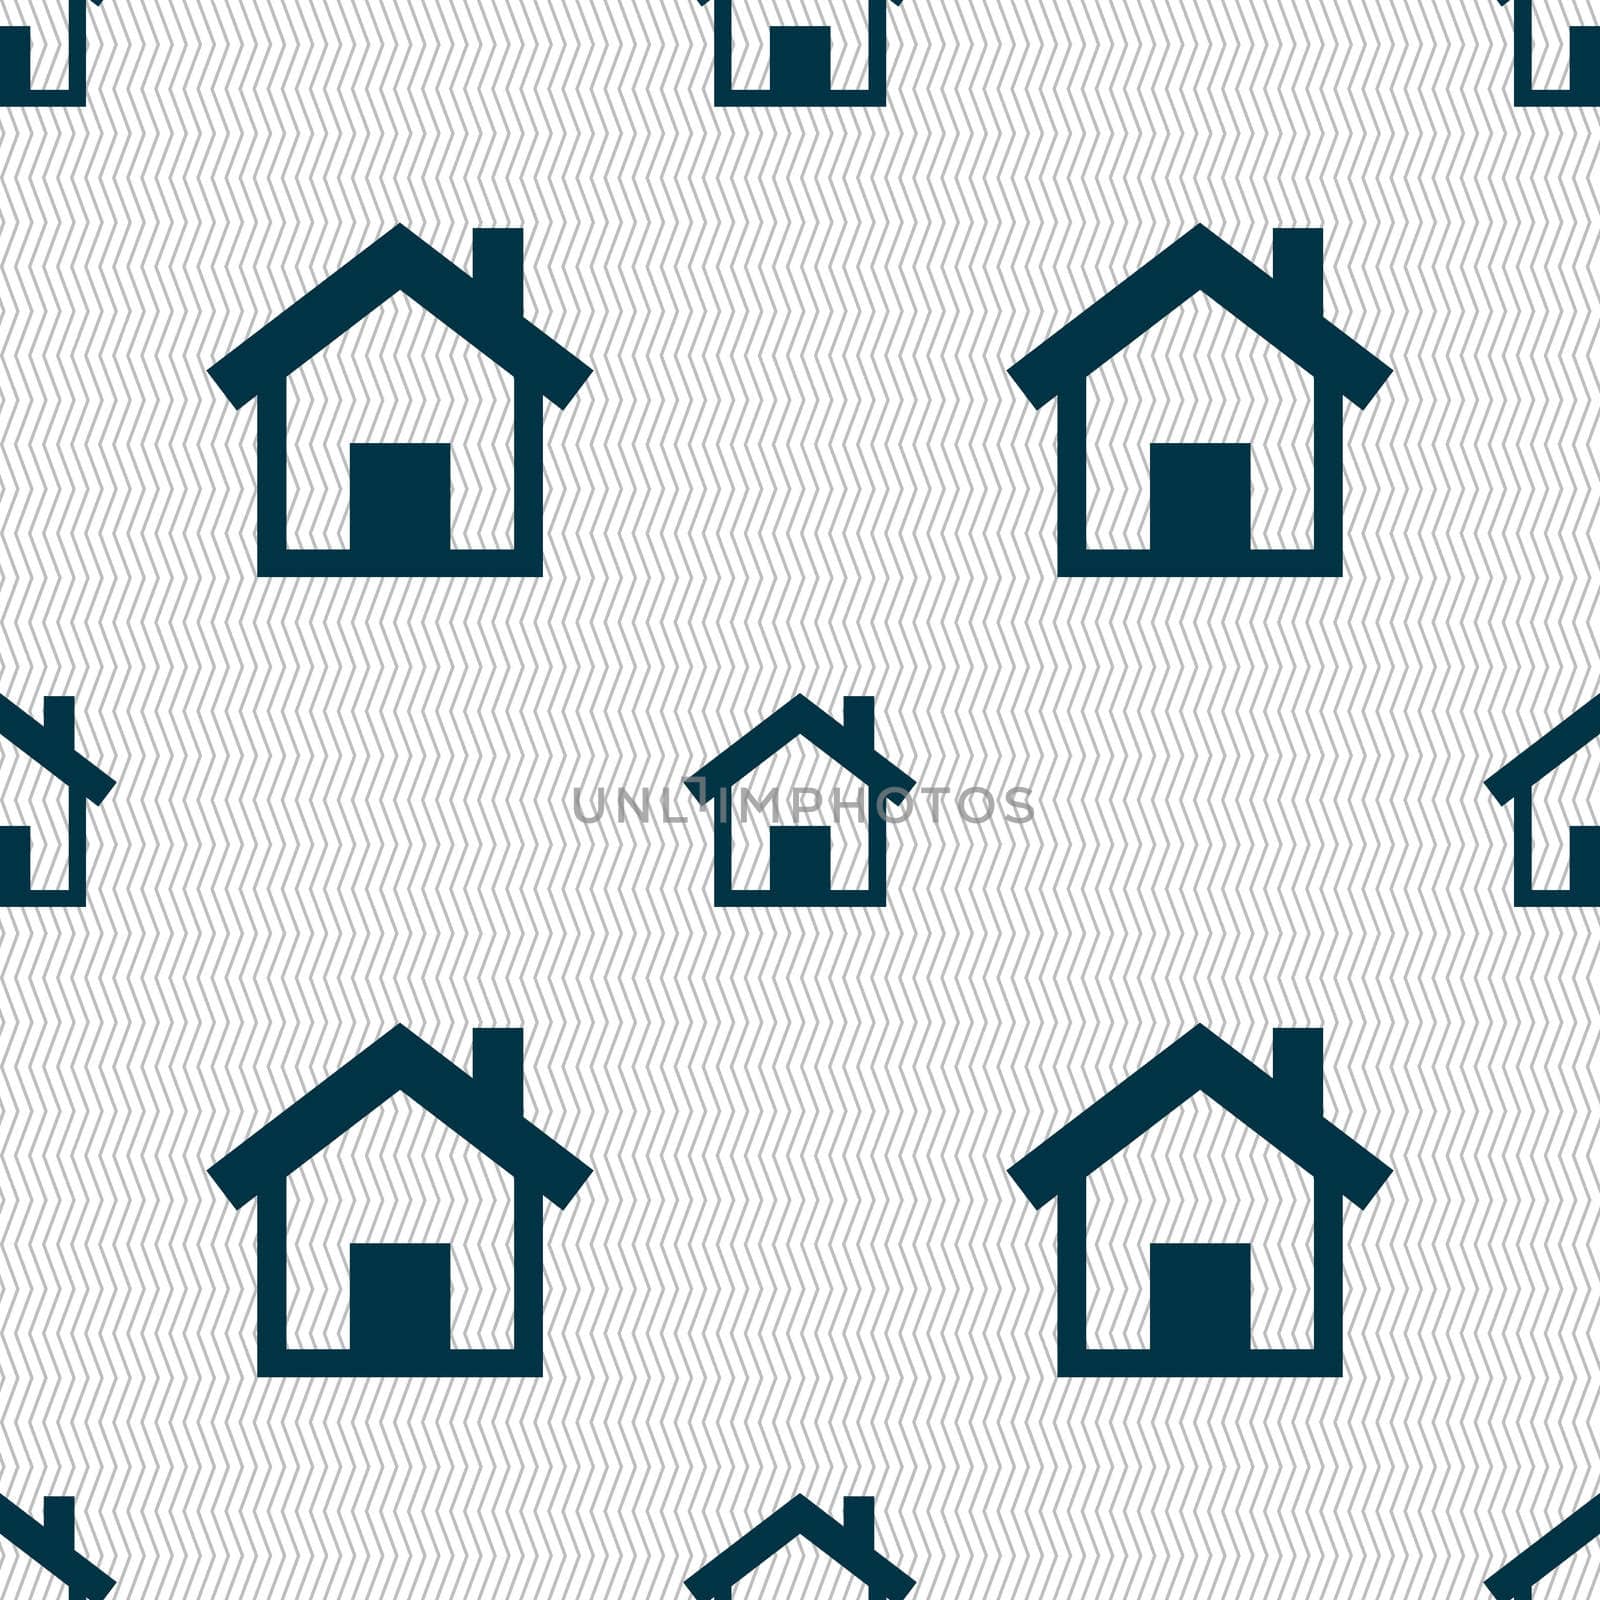 Home sign icon. Main page button. Navigation symbol. Seamless abstract background with geometric shapes. illustration